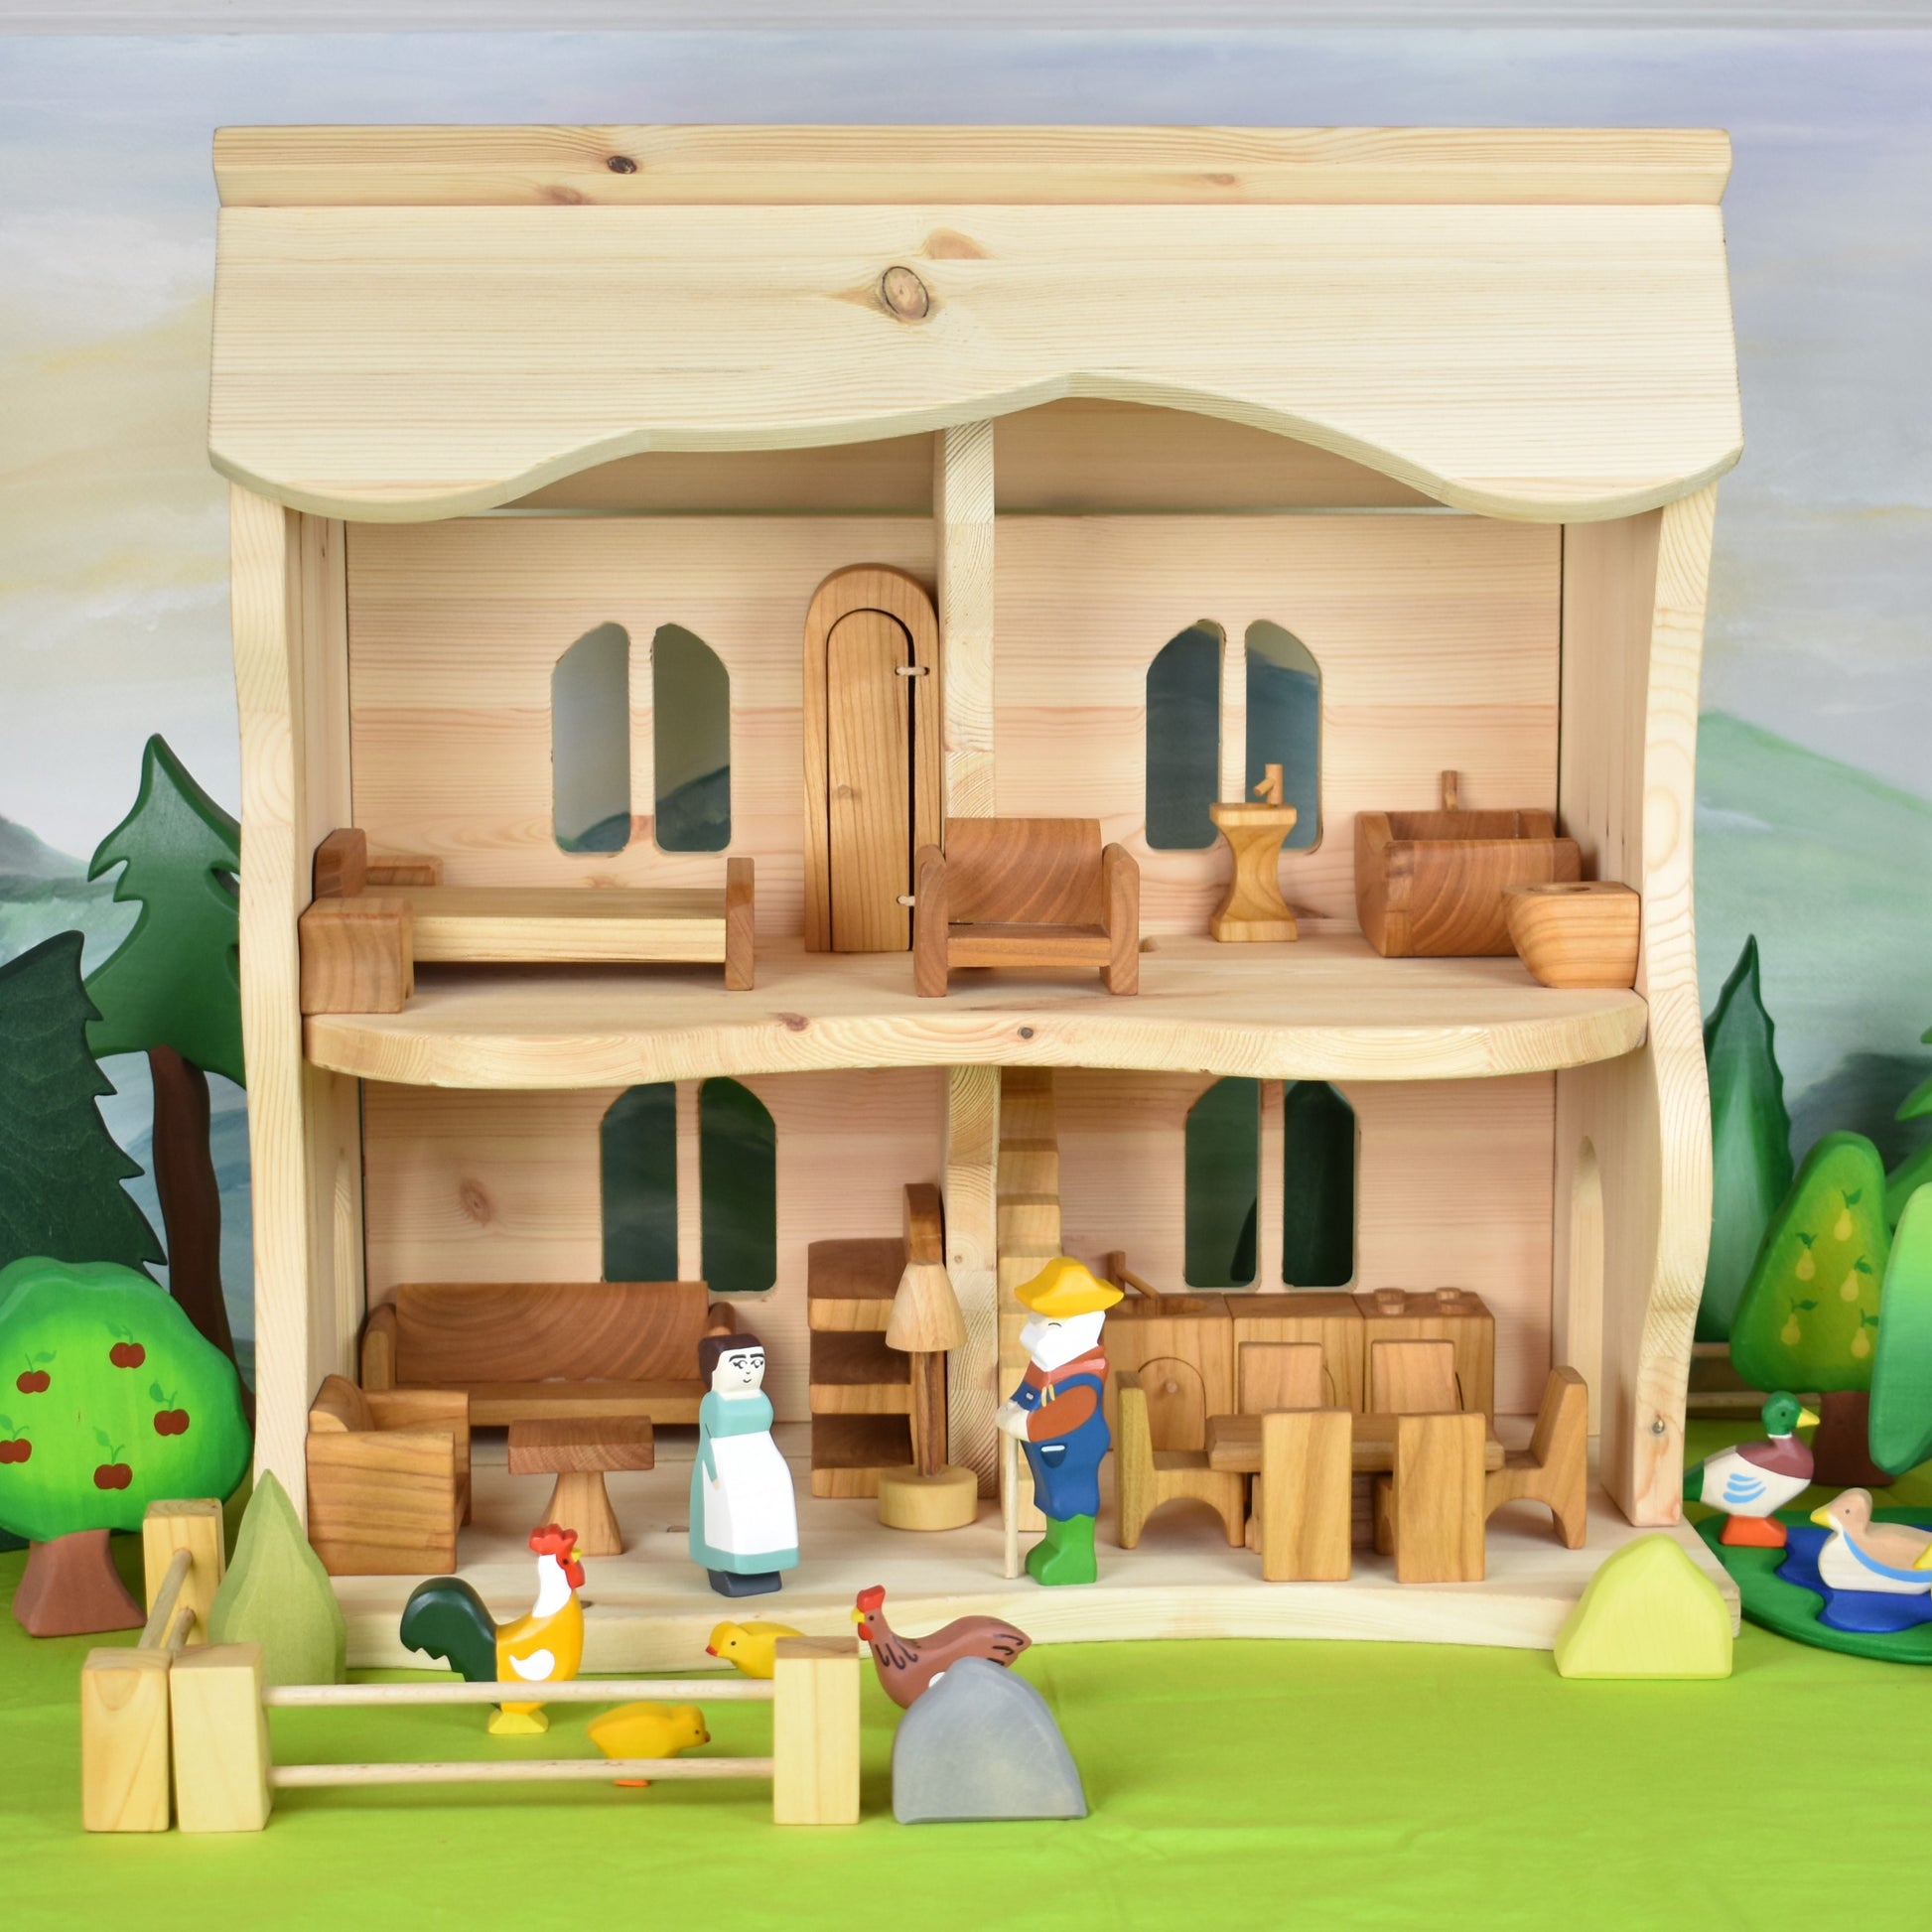 The Little House in the Forest Wooden Doll House Hand-made All Natural Easy  to Assemble Dolls Toys Figurine Furniture Toy Waldorf Toys 